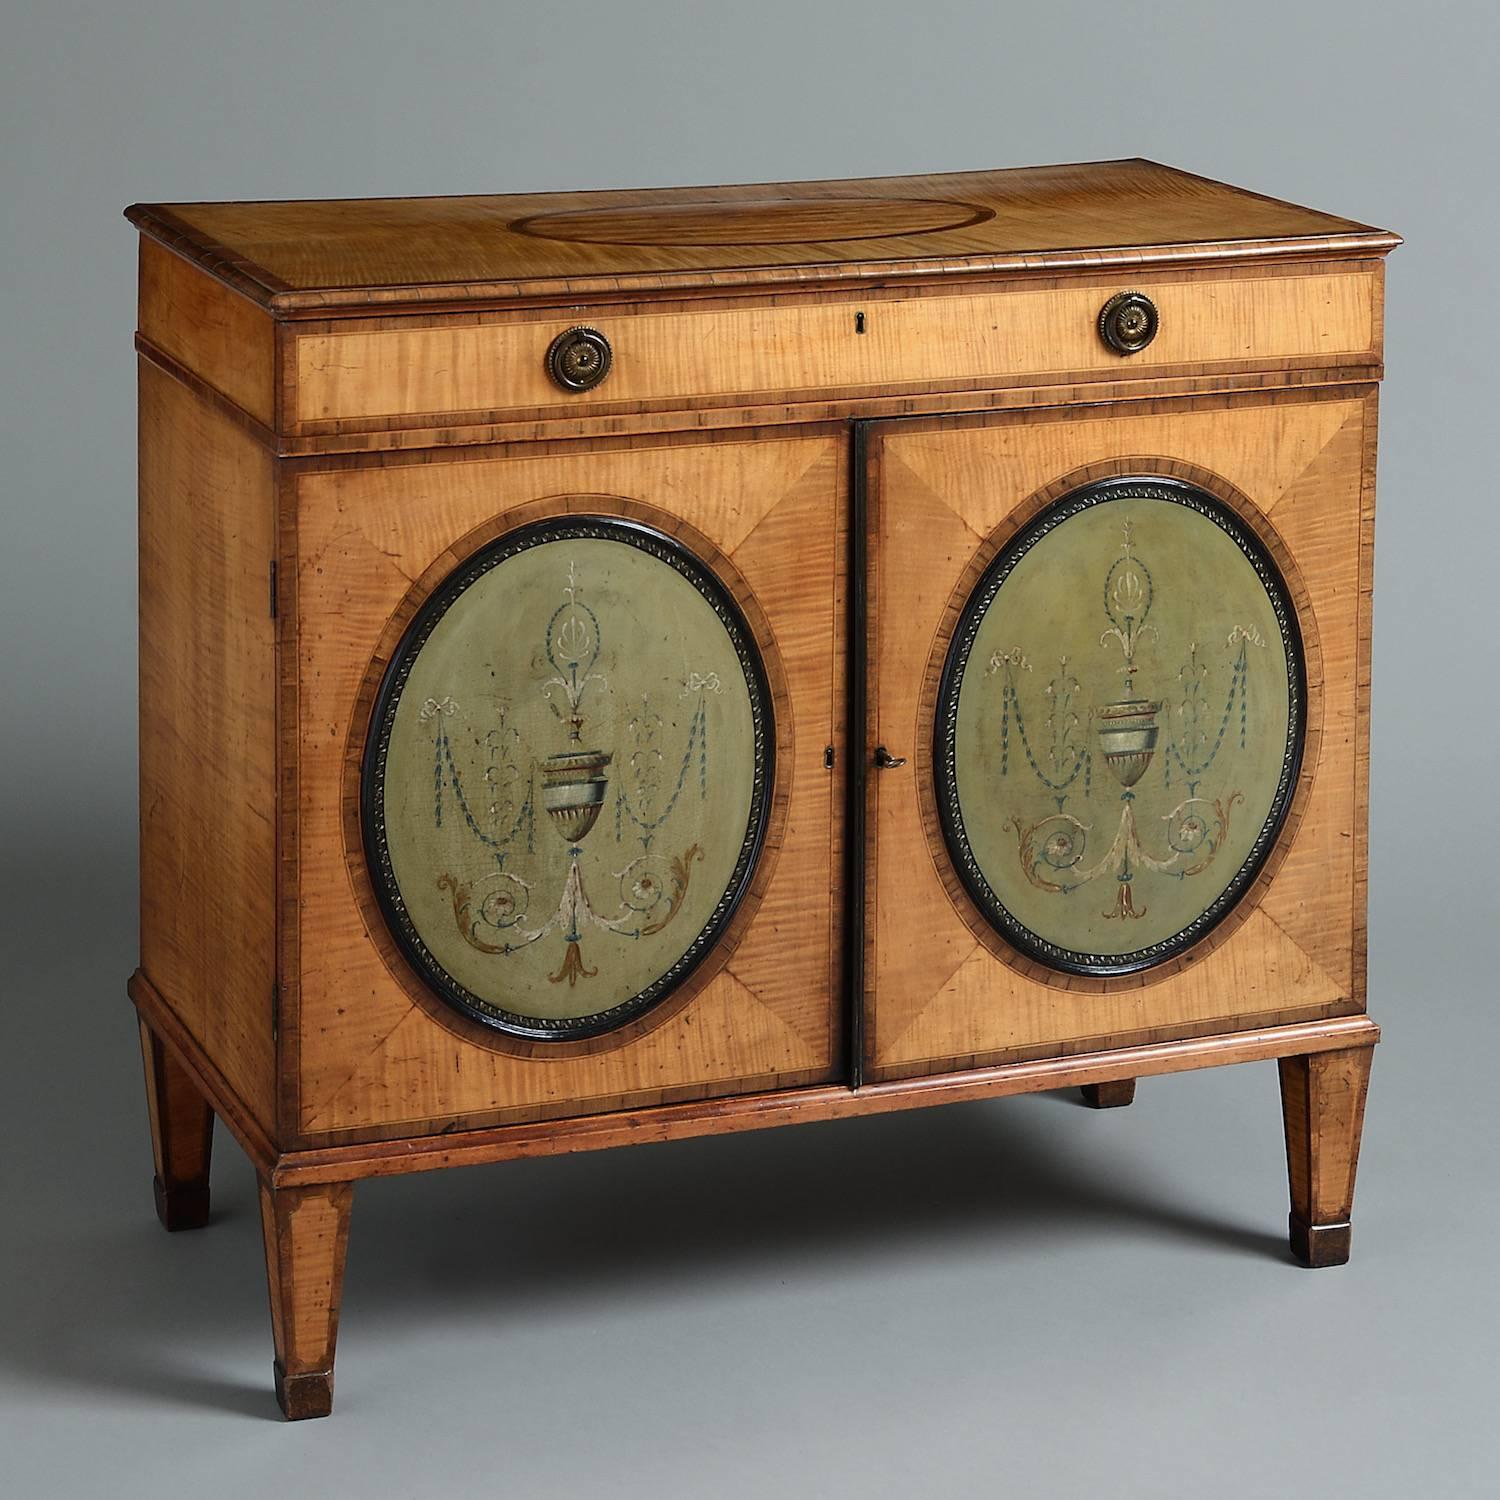 A rare George III satinwood side cabinet inset with painted tôle panels, circa 1790.

Banded in kingwood, the mahogany-lined frieze drawer with original gilt brass handle, the doors inset with convex oval tole panels painted with urns flanked by